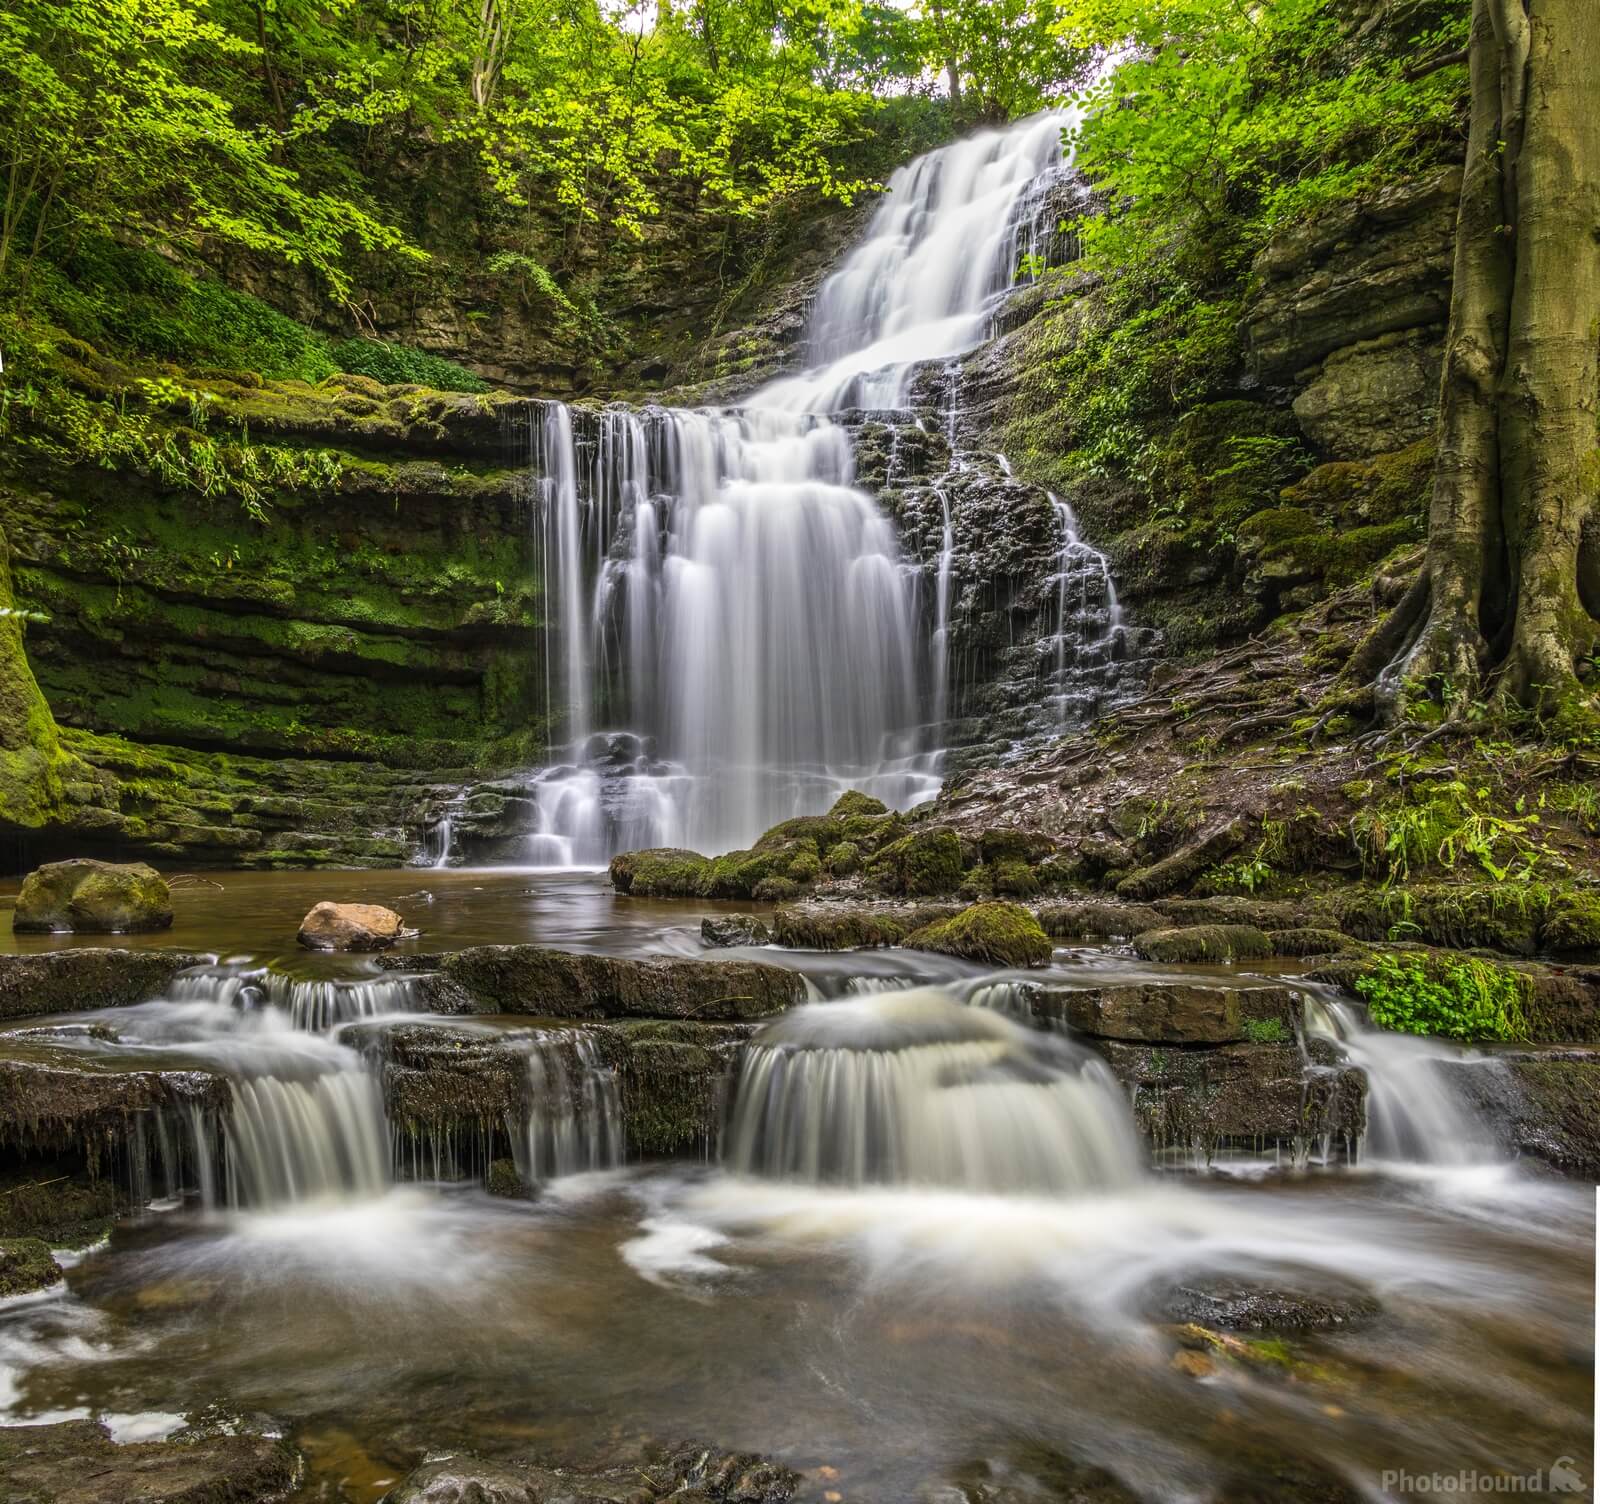 Image of Scaleber Force by Andy Killingbeck